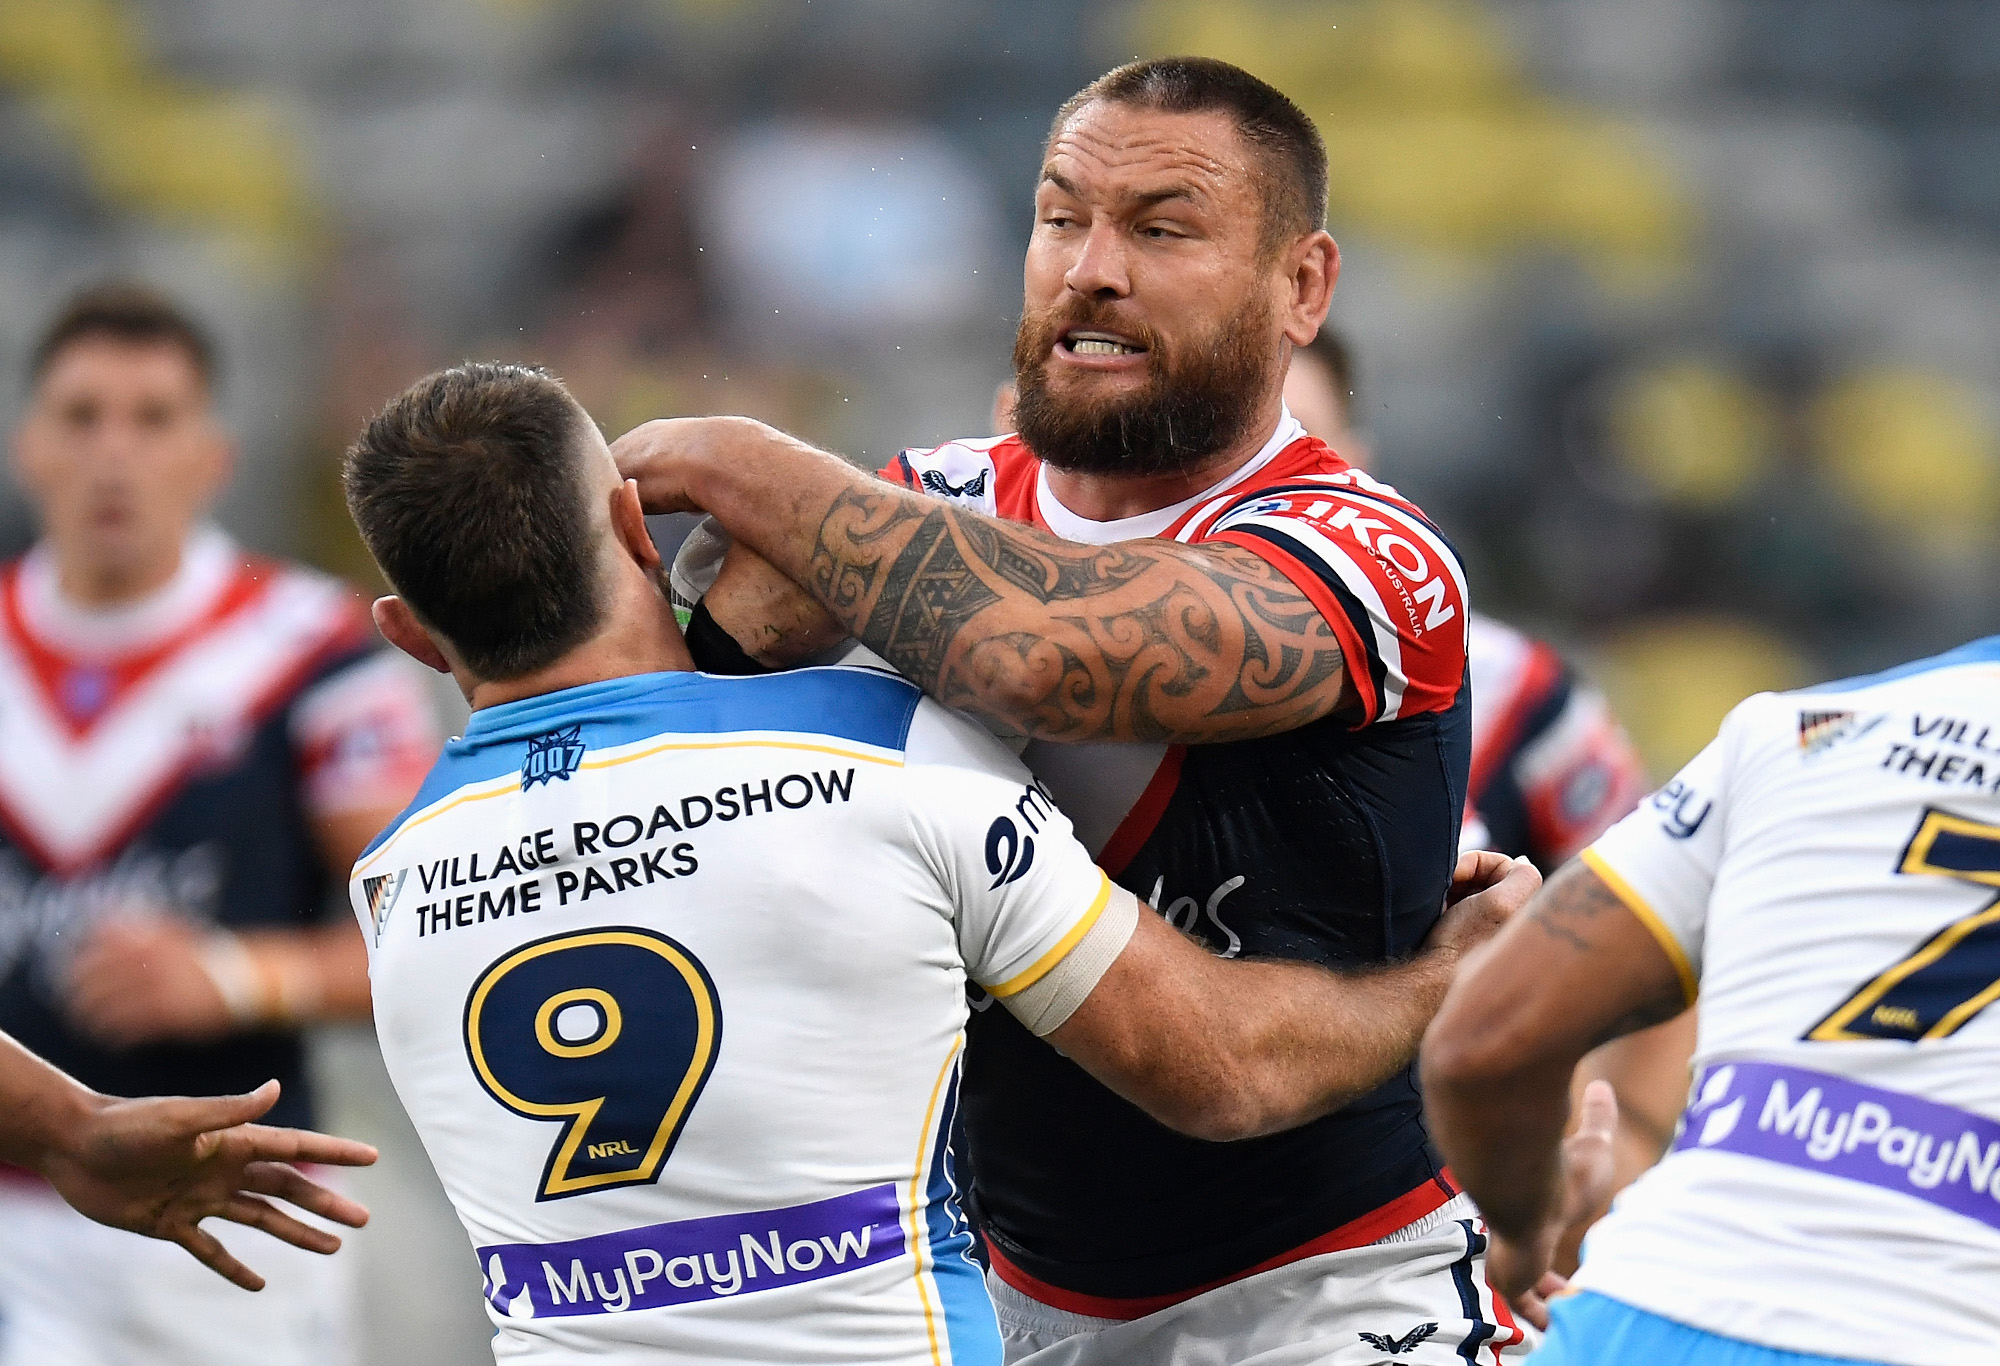 Jared Waerea-Hargreaves of the Roosters is tackled during the NRL Elimination Final match between Sydney Roosters and Gold Coast Titans.